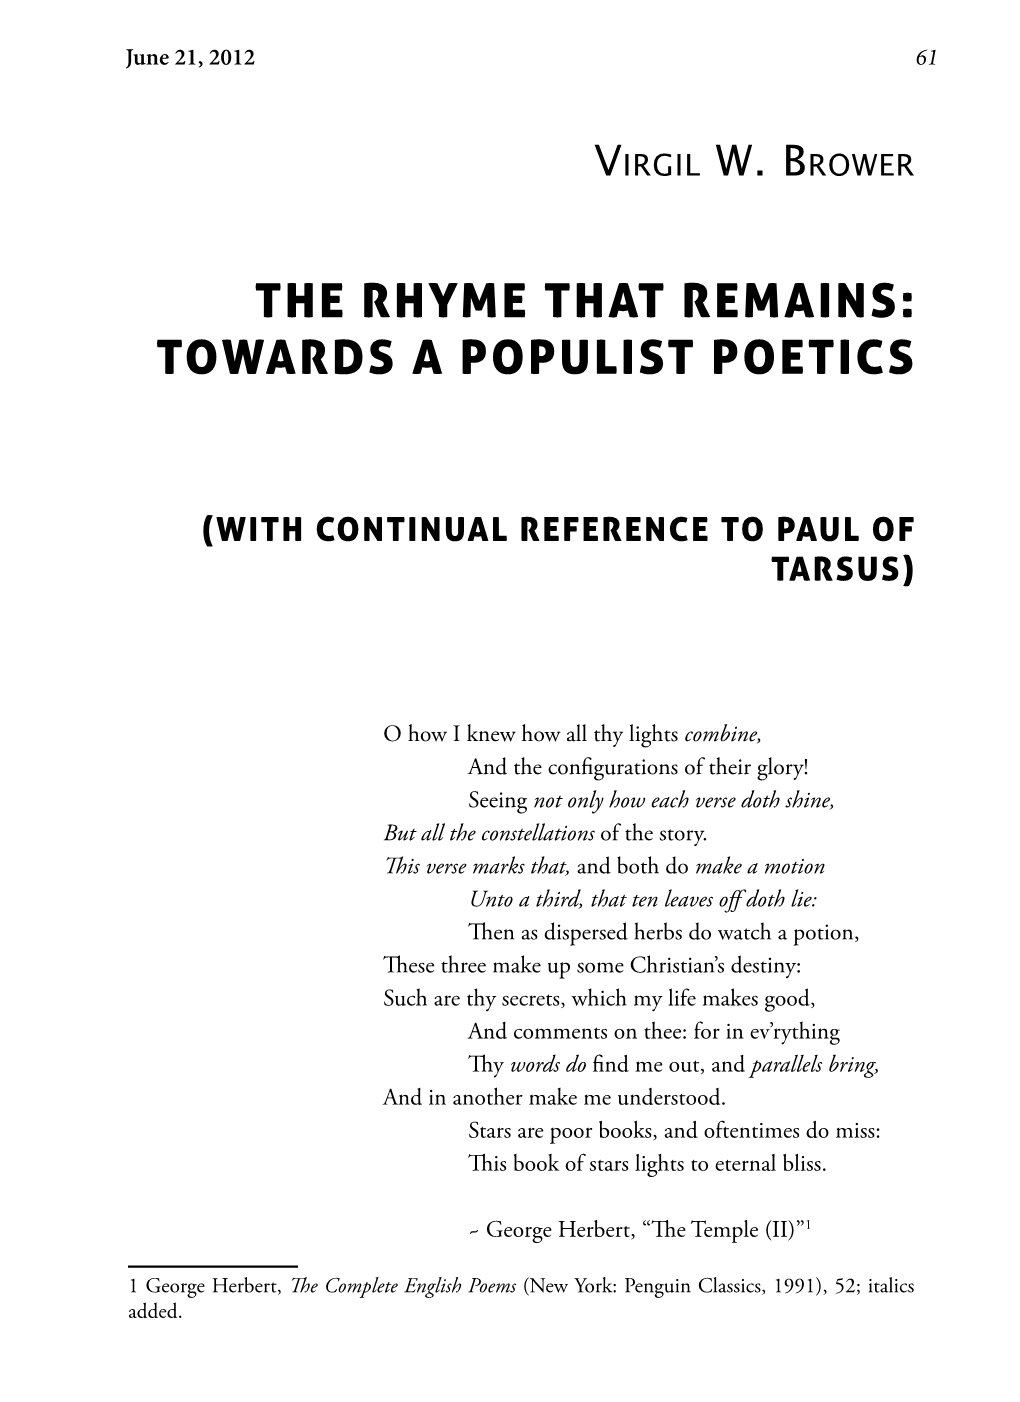 The Rhyme That Remains: Towards a Populist Poetics